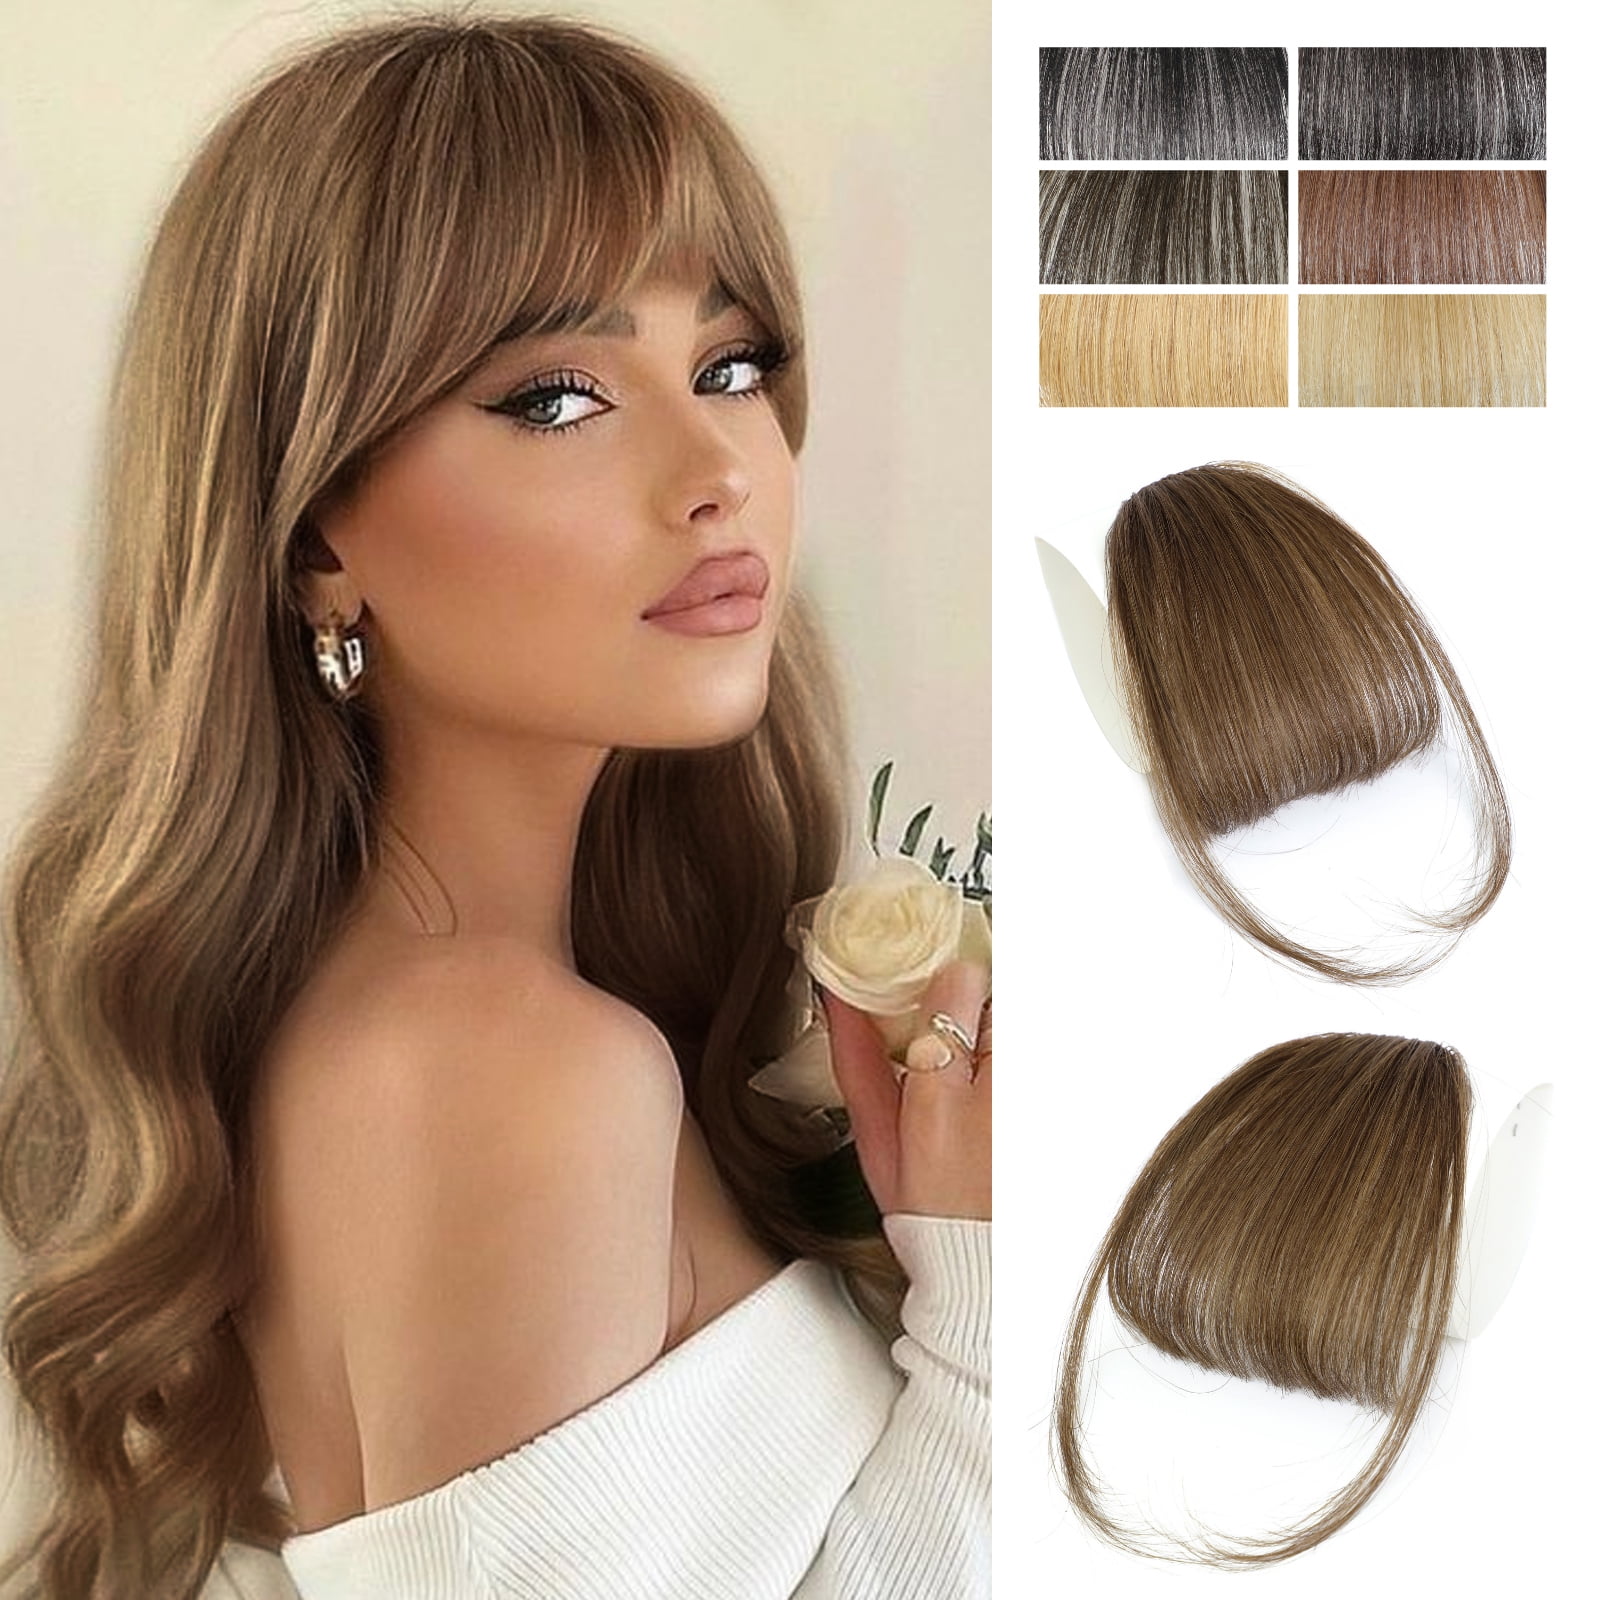 MORICA Clip in Bangs for Women 100% Human Hair Extensions Wispy Bangs Fringe  with Temples Hairpieces Air Bangs Flat Bangs Clip Curved Bangs for Daily  Wear 